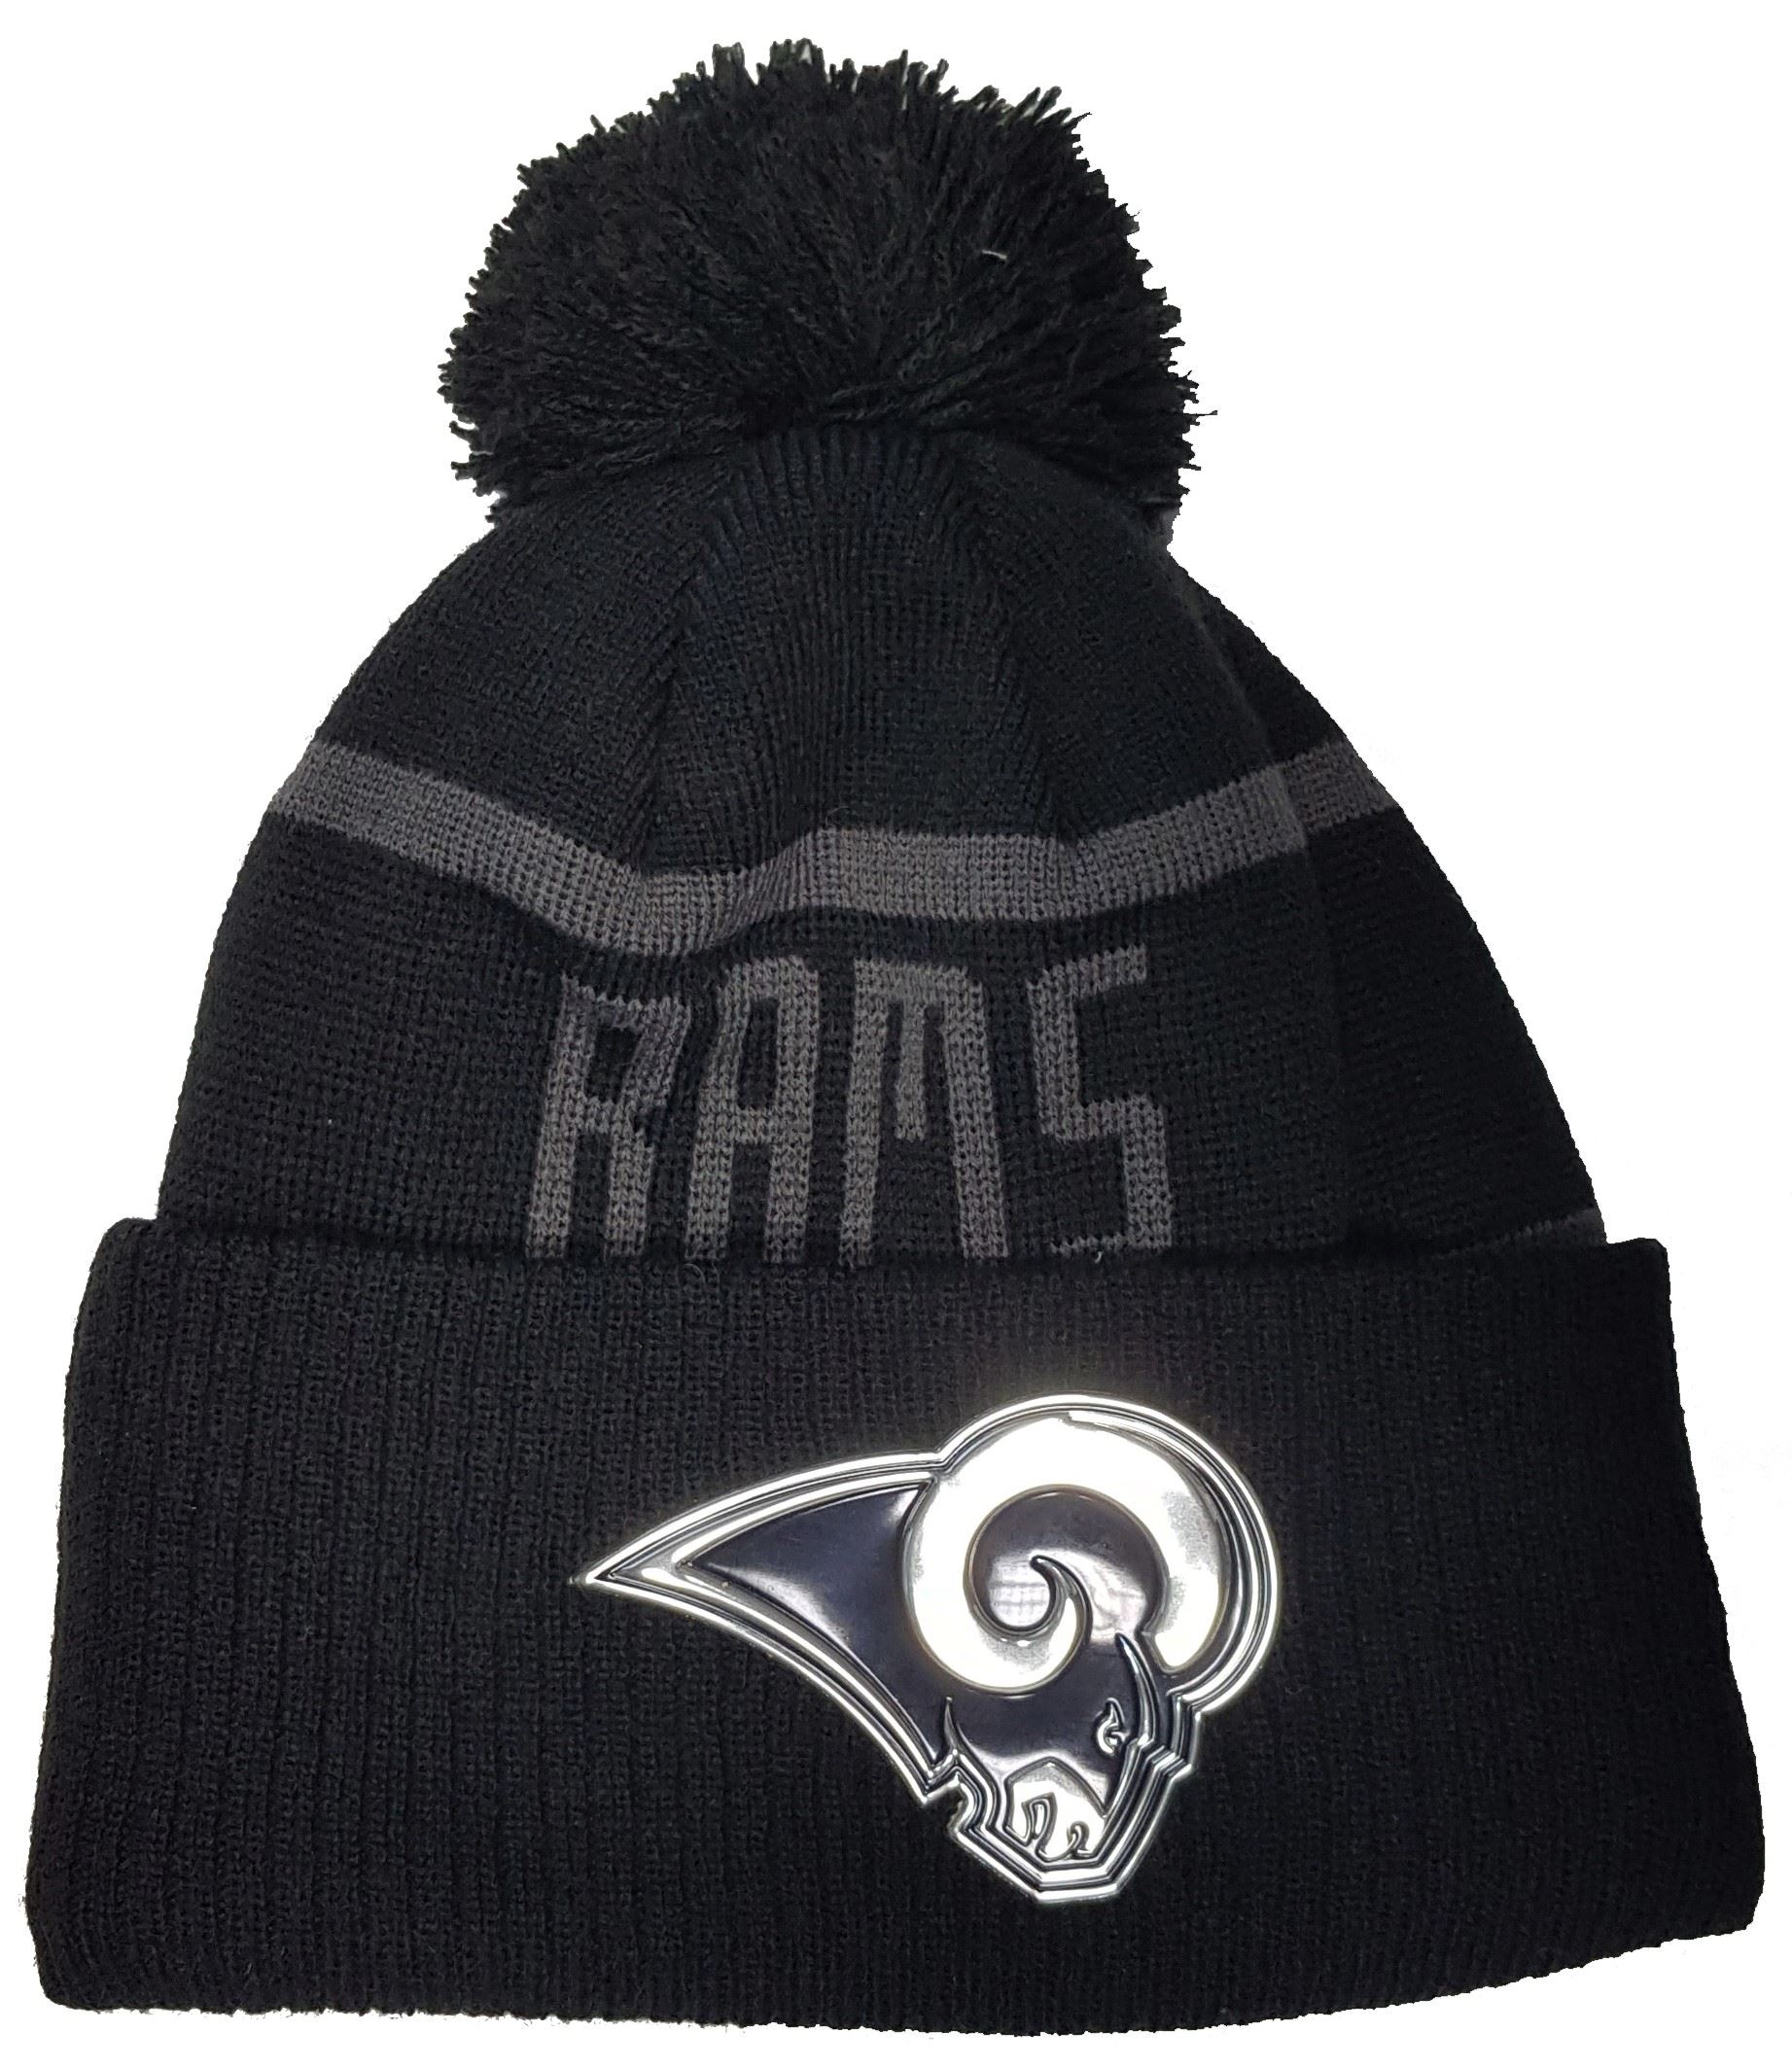 Los Angeles Rams NFL Black Collection Beanie New Era